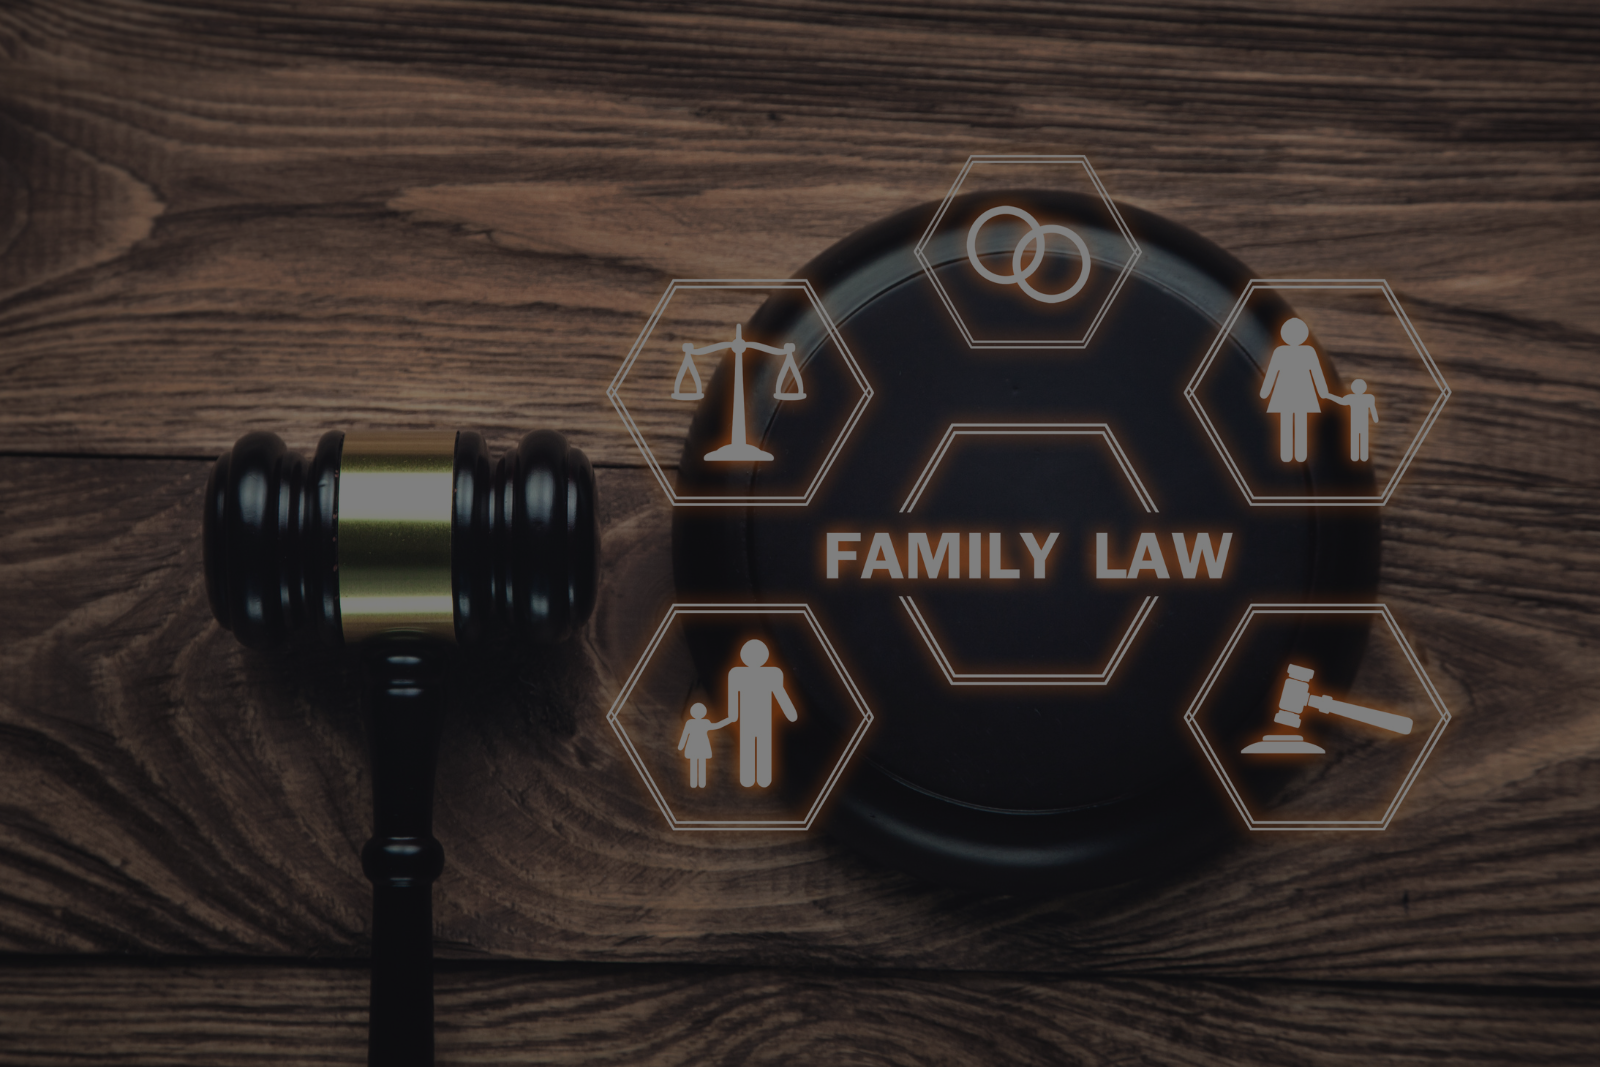 family law, Family Law Amendment Bill 2023, family courts, FCFCOA, parenting, custody, property settlement, separarion, divorce, family, parenting orders, legislation, children's lawyers, sydney family lawyers, ivy law group, blog, legal insights, children